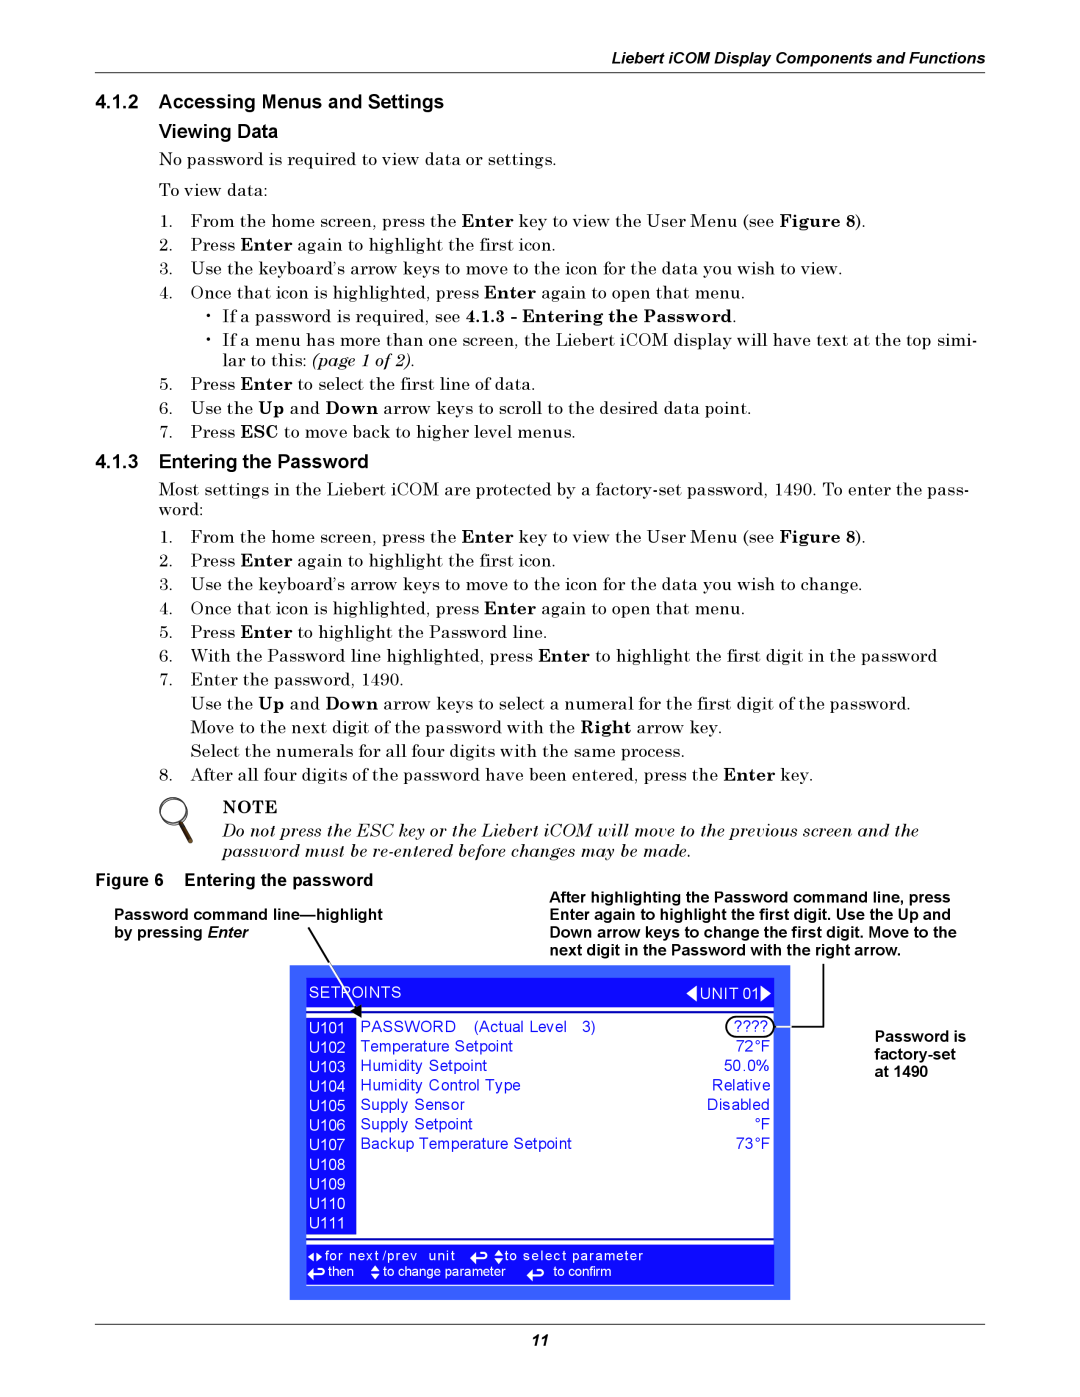 Emerson 3000/ITR manual 4.1.2Accessing Menus and Settings Viewing Data, 4.1.3Entering the Password, Entering the password 